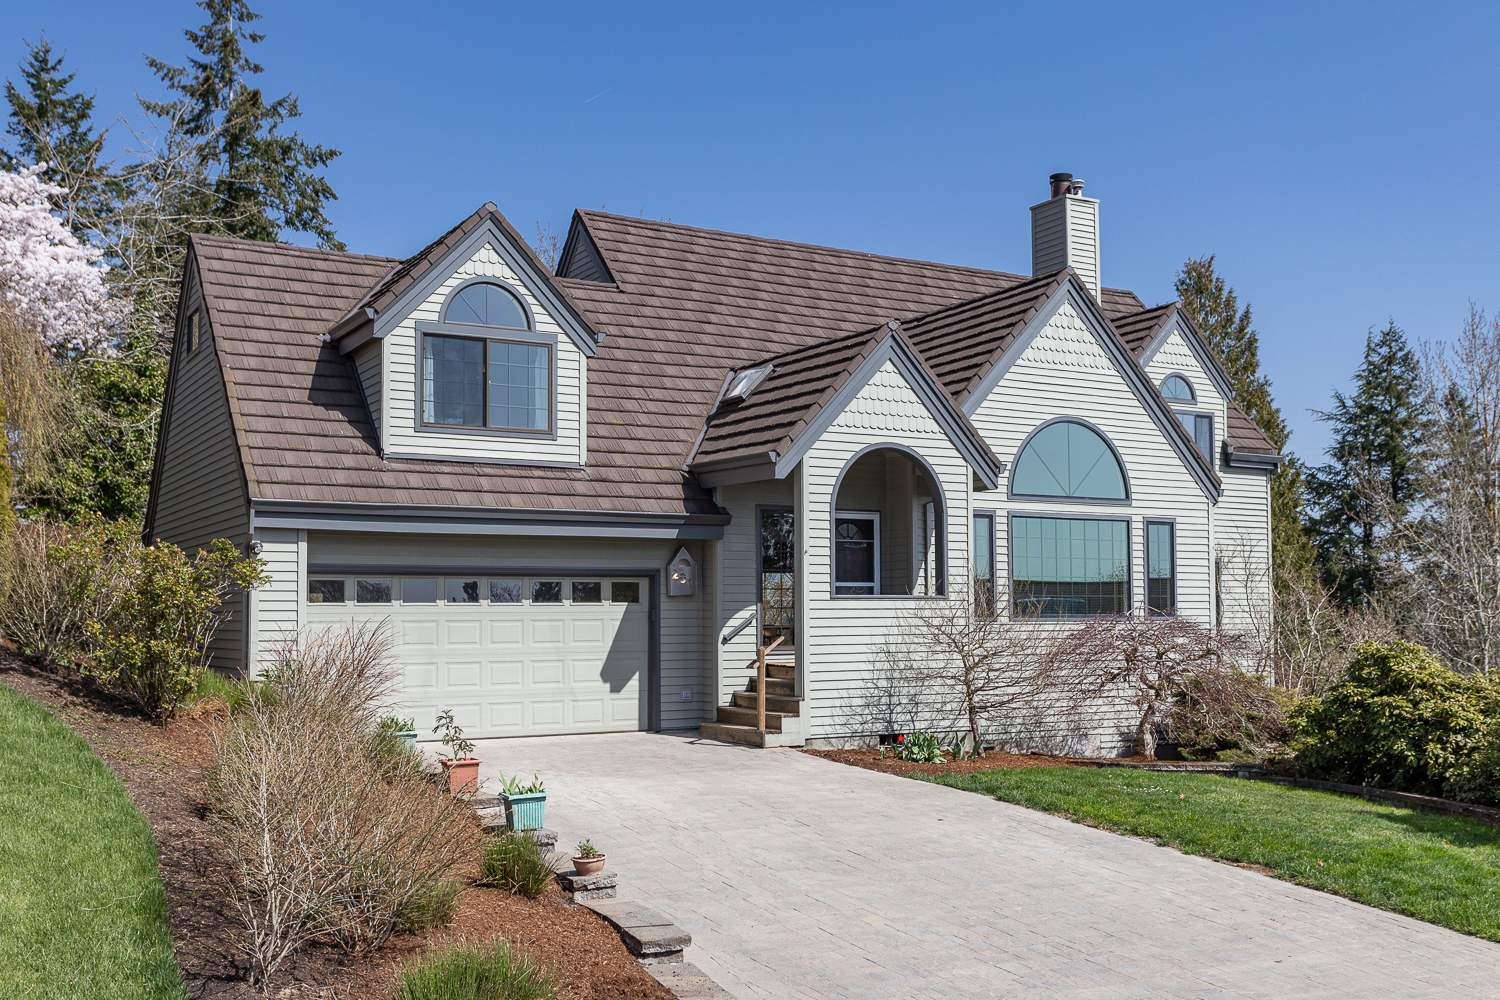 SOLD for $782,000! 2911 SW Orchard Hill Pl., Lake Oswego, 97035